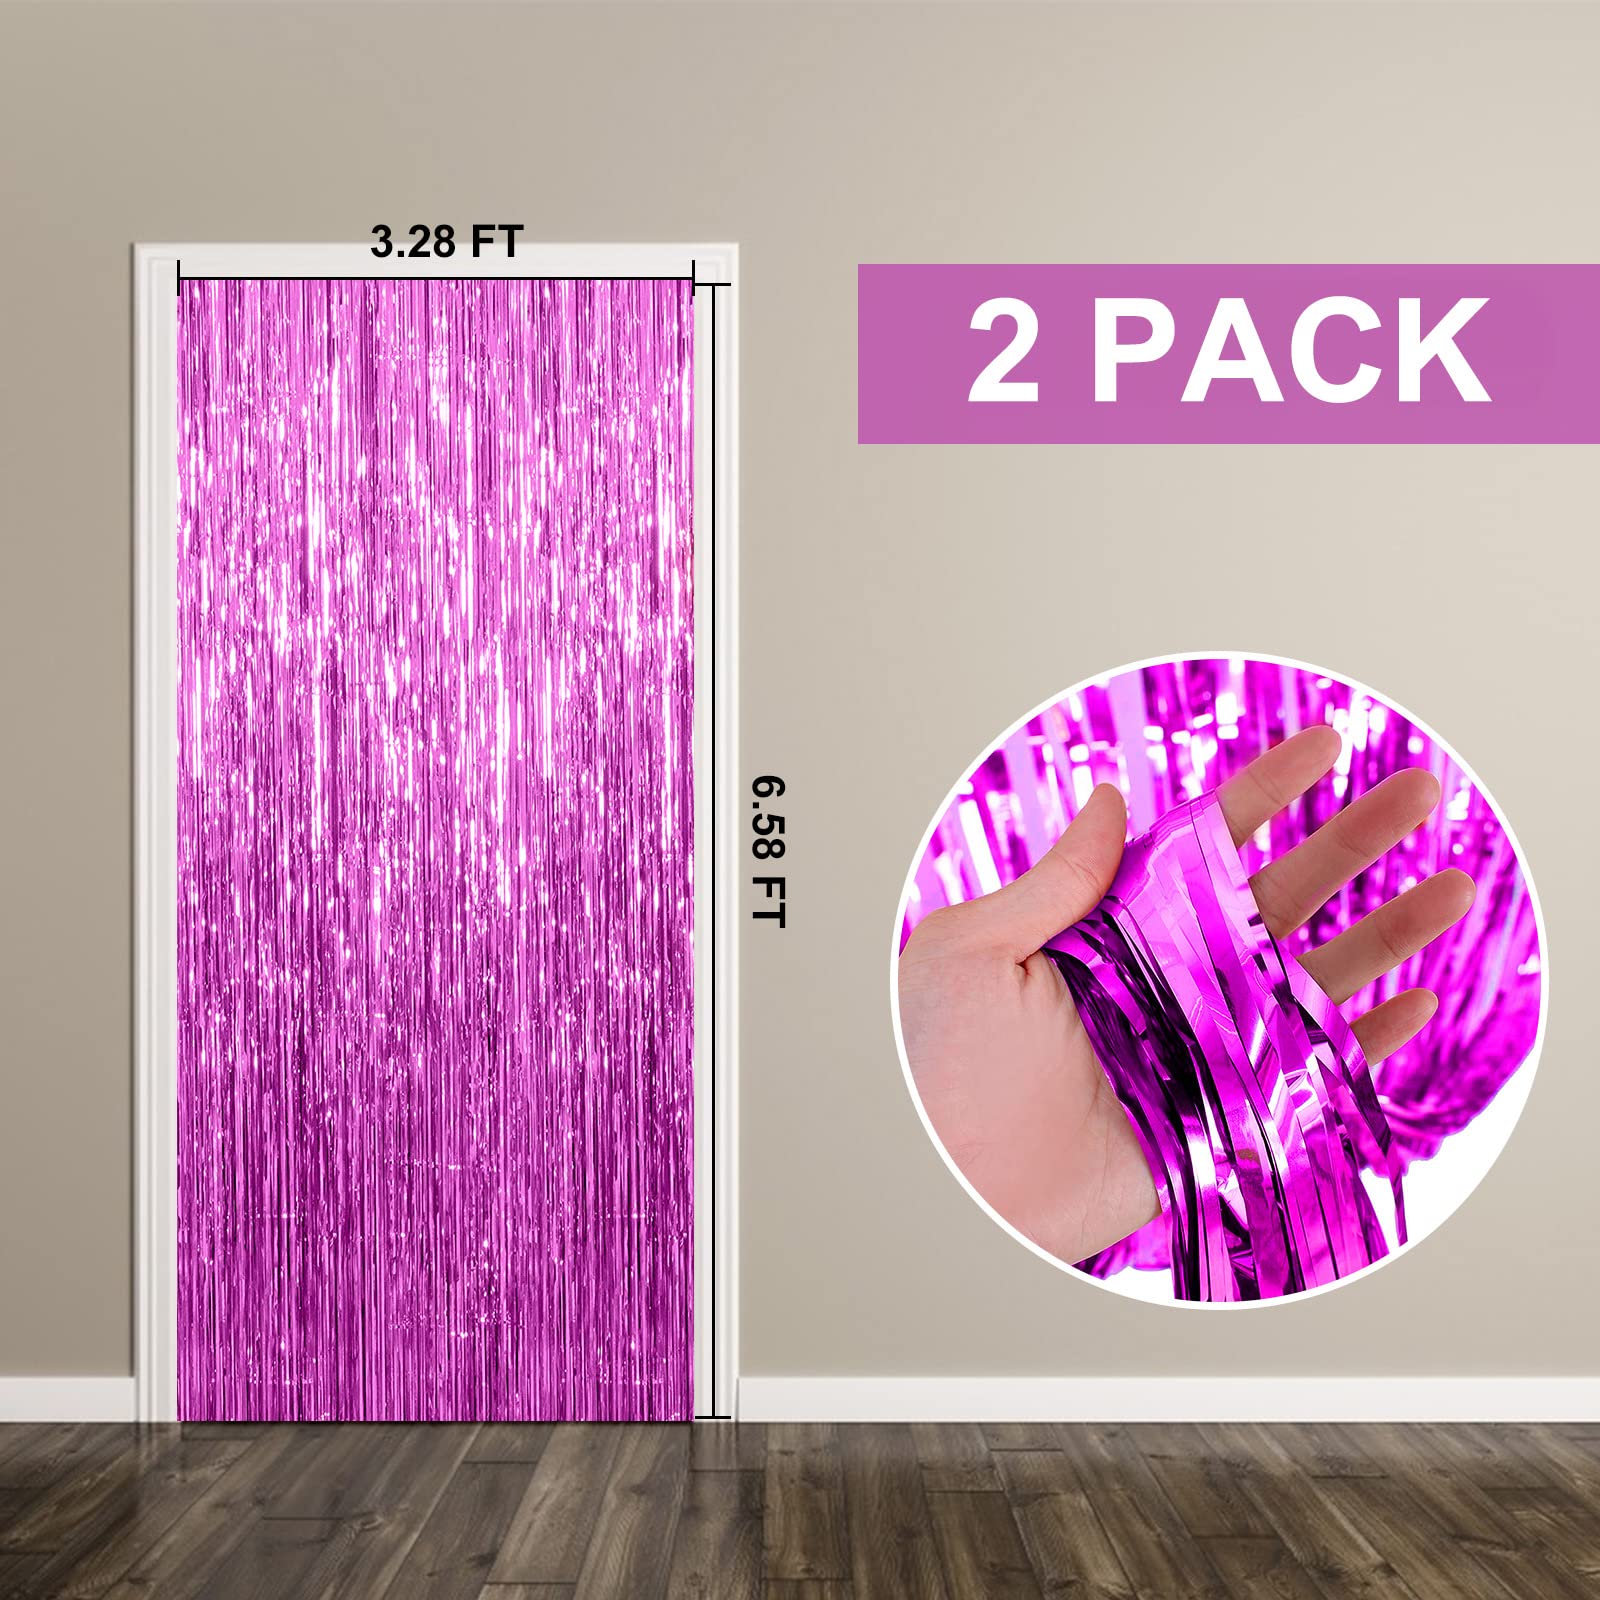 2 Pack Hot Pink Backdrop Curtain Party Streamers Hot Pink Birthday Decorations Foil Fringe Photo Backdrop Party Supplies Fiesta Grad Party Decorations Theme Party Decor